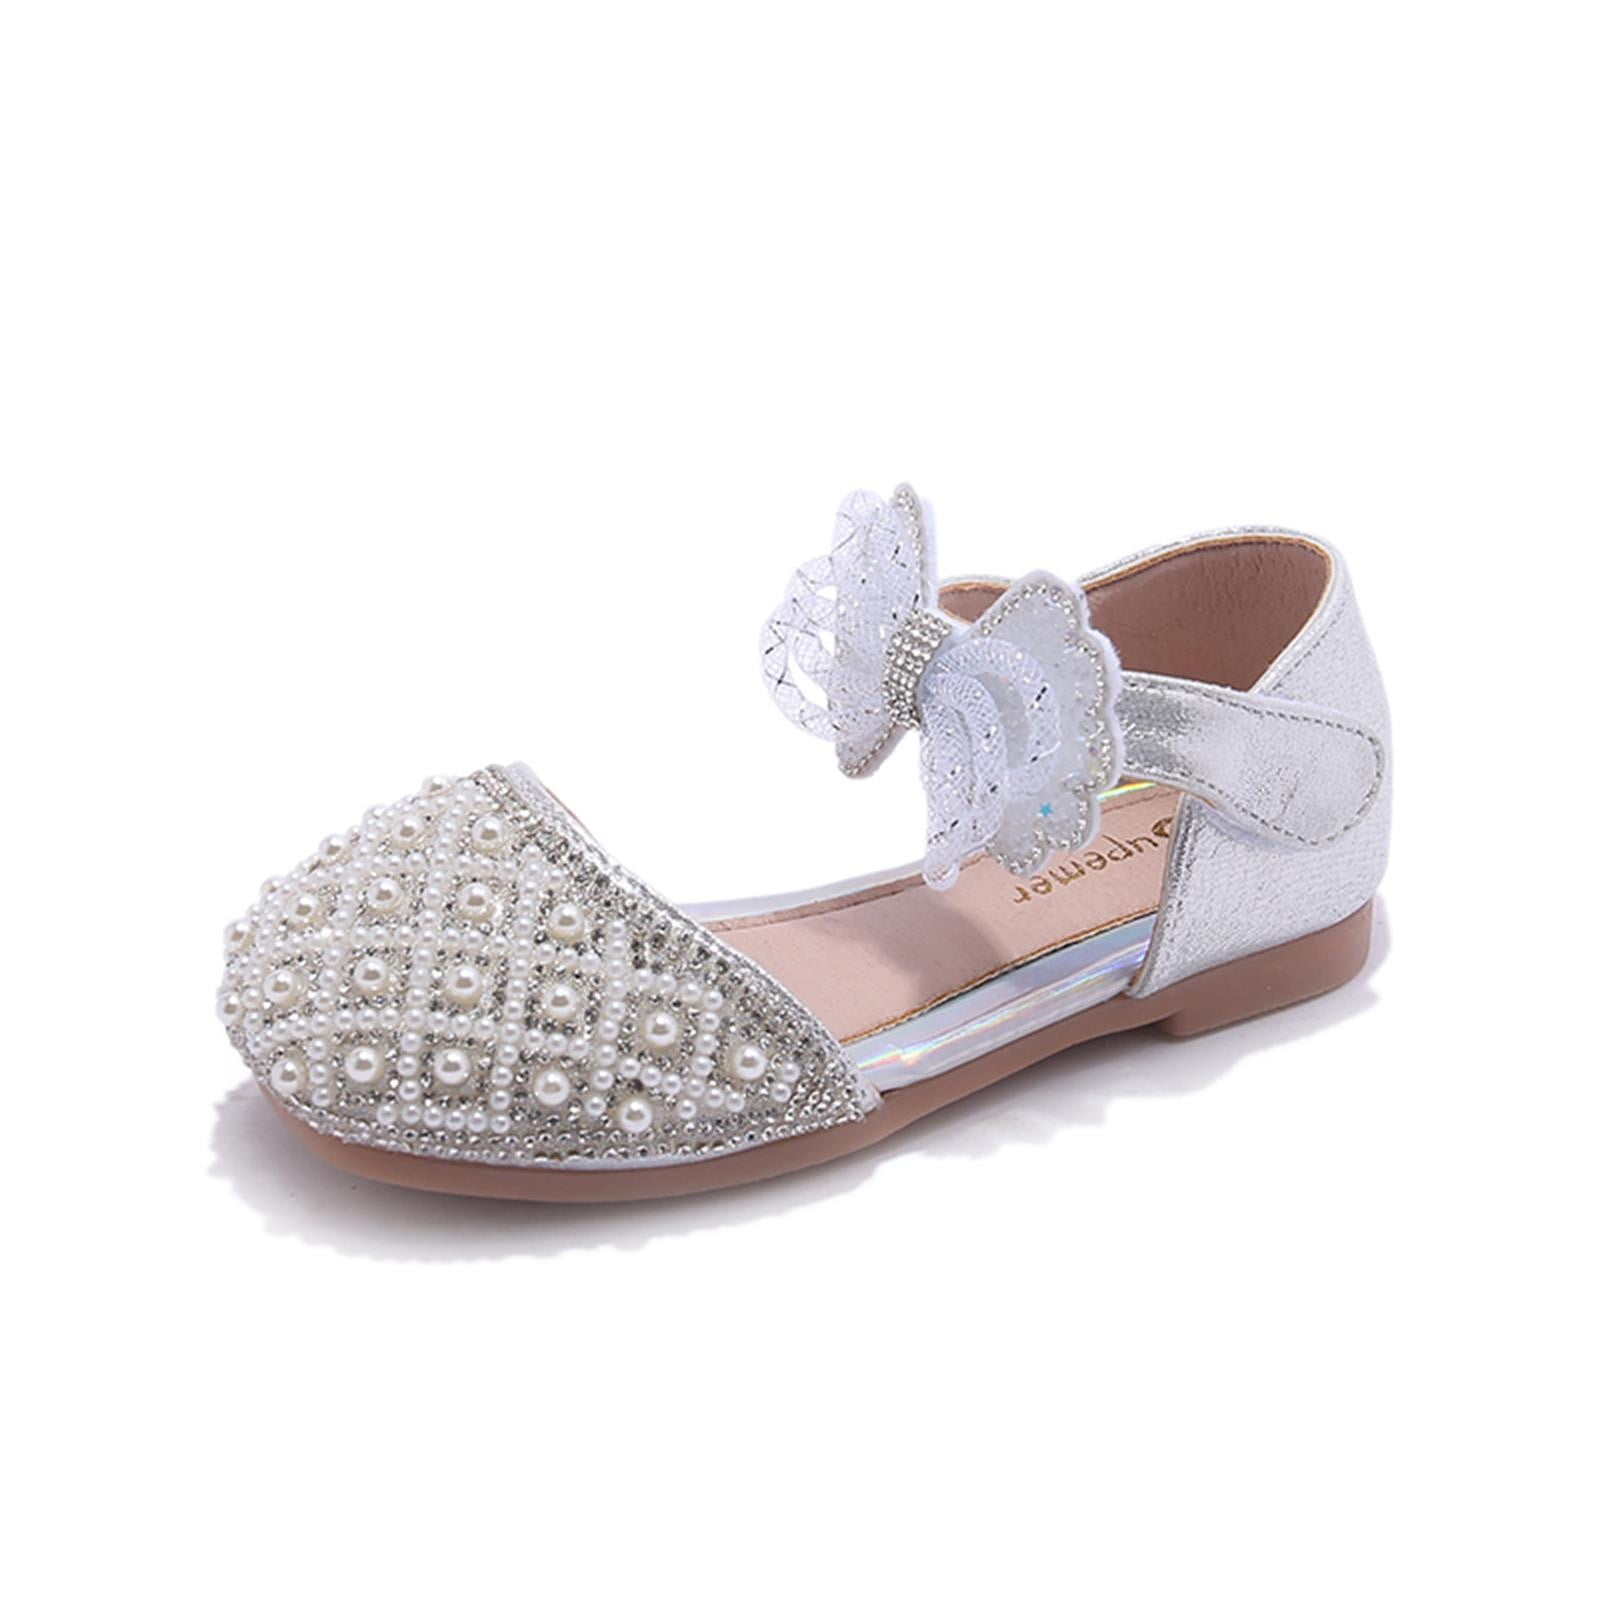 Girls' Adorable Flower Wedding Party Princess Dress Shoes Silver 4.5 ...